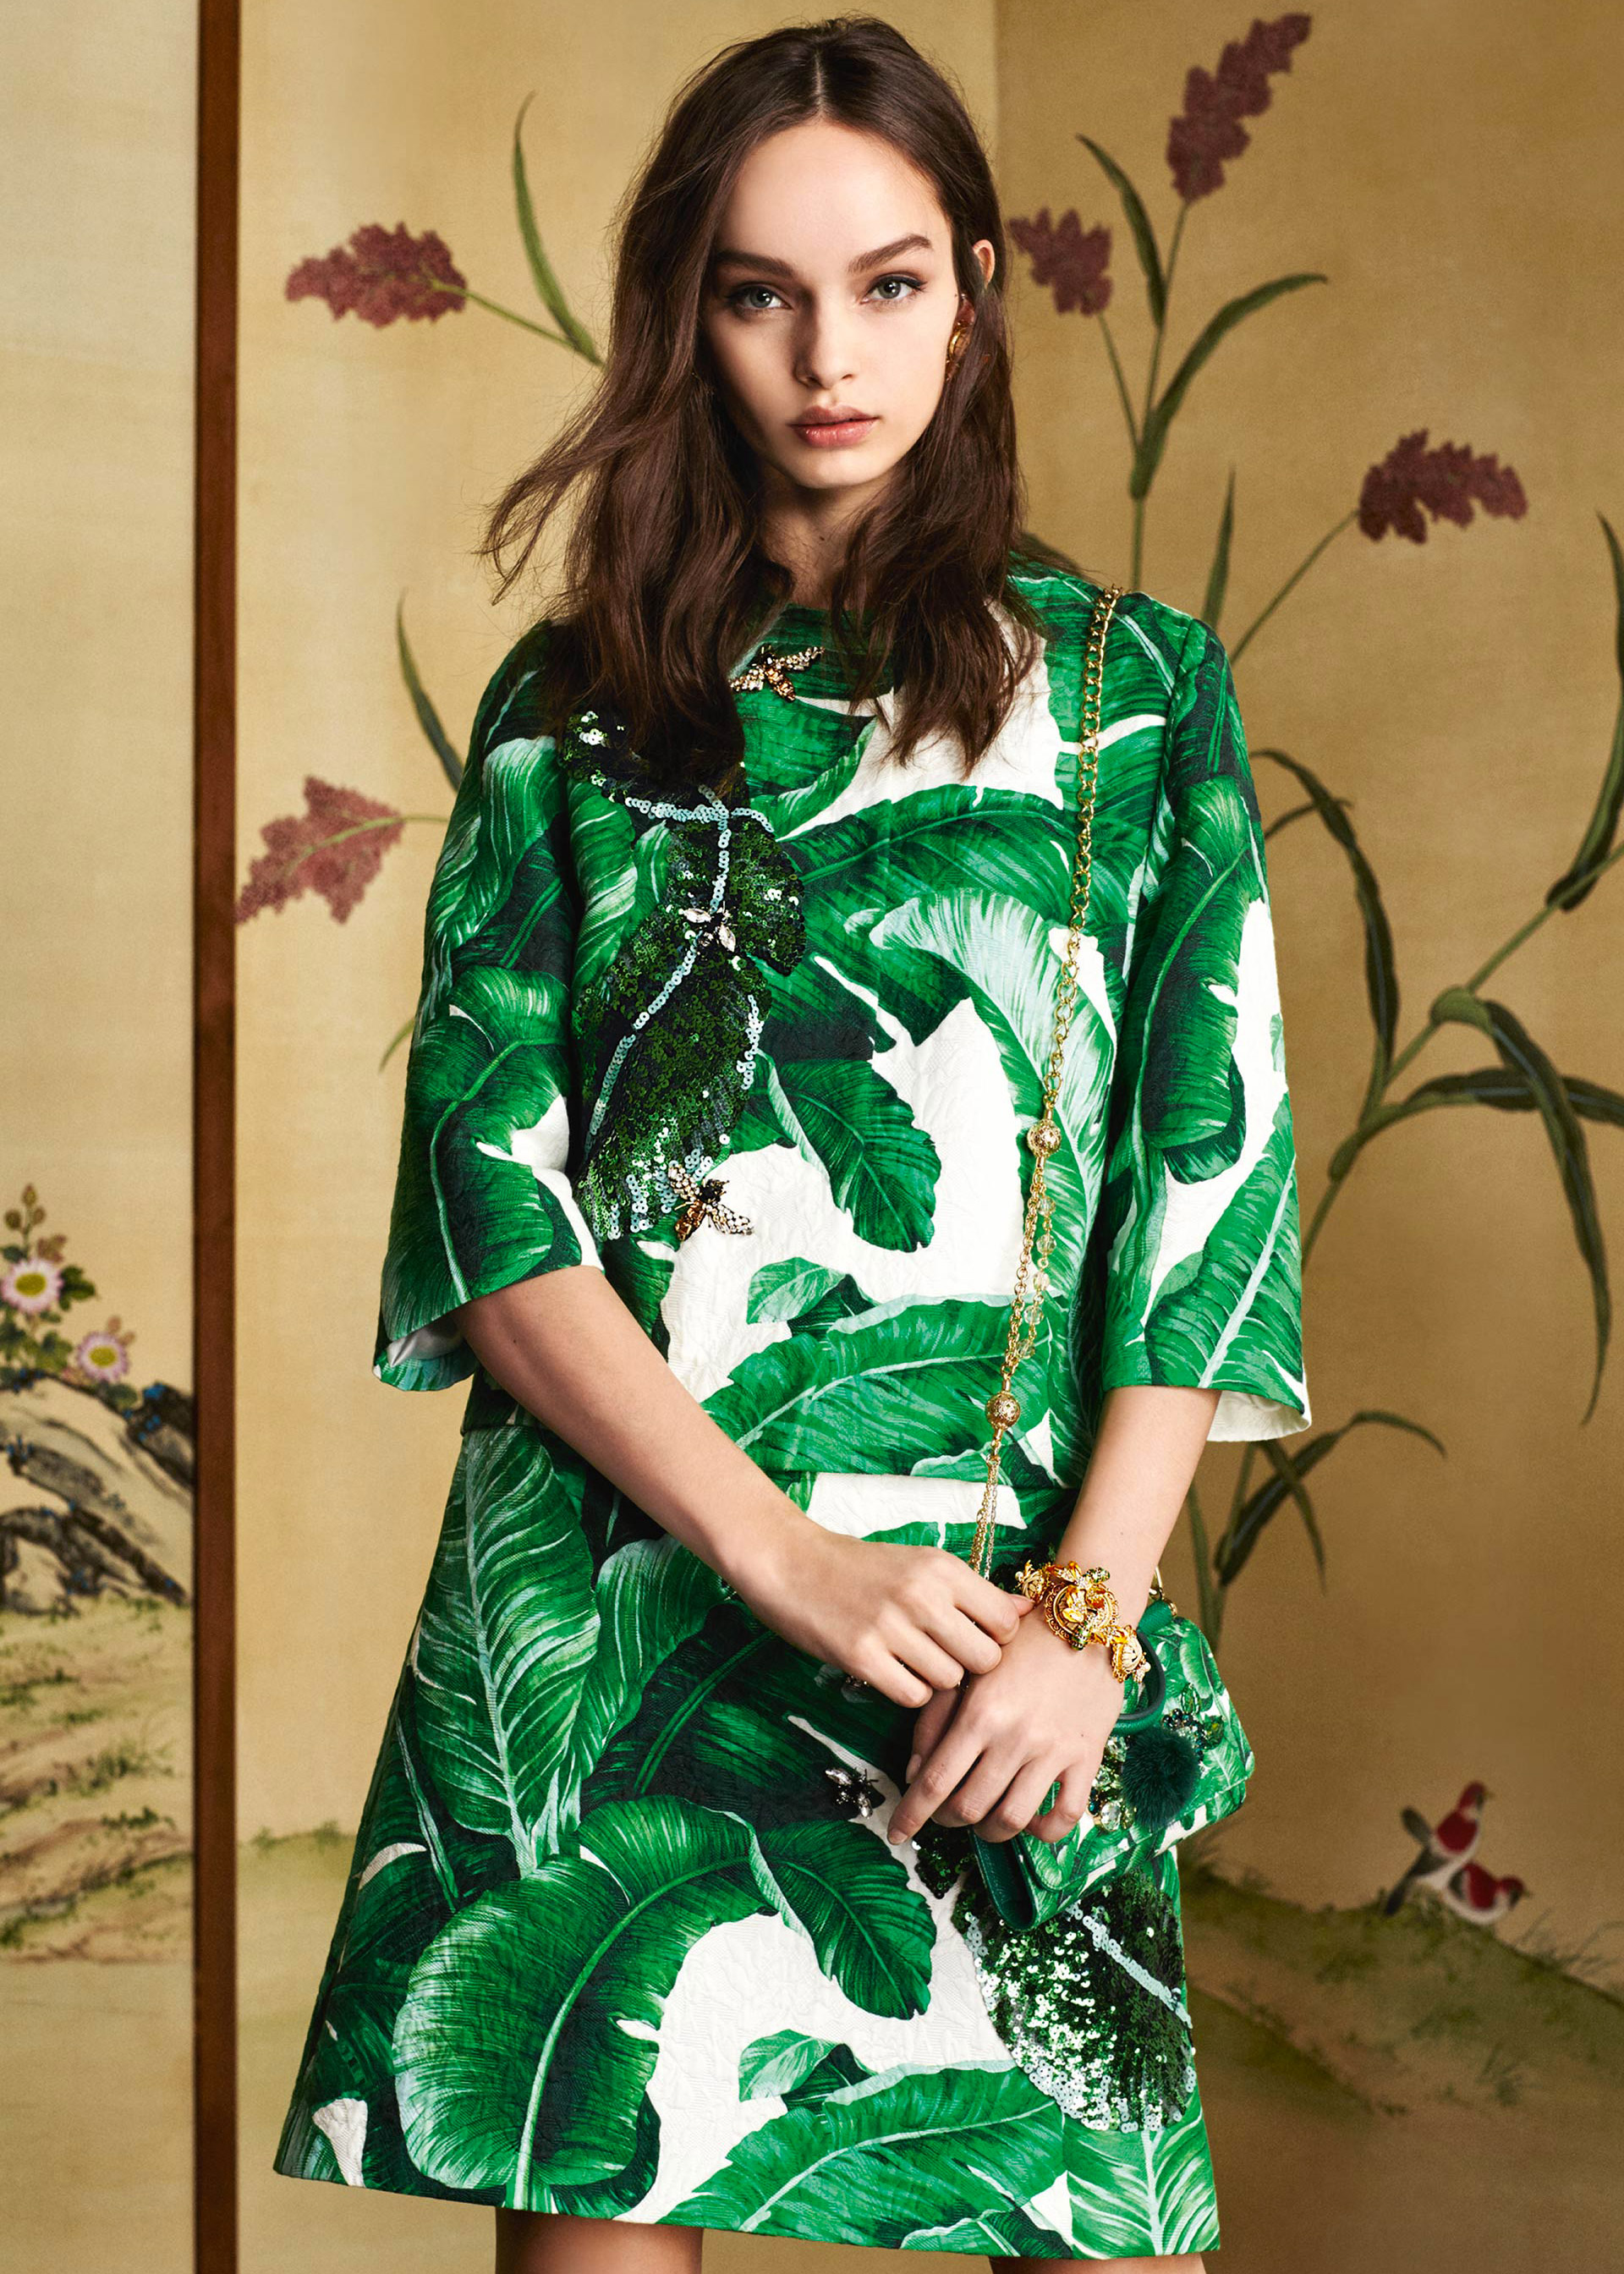 dolce and gabbana tropical collection